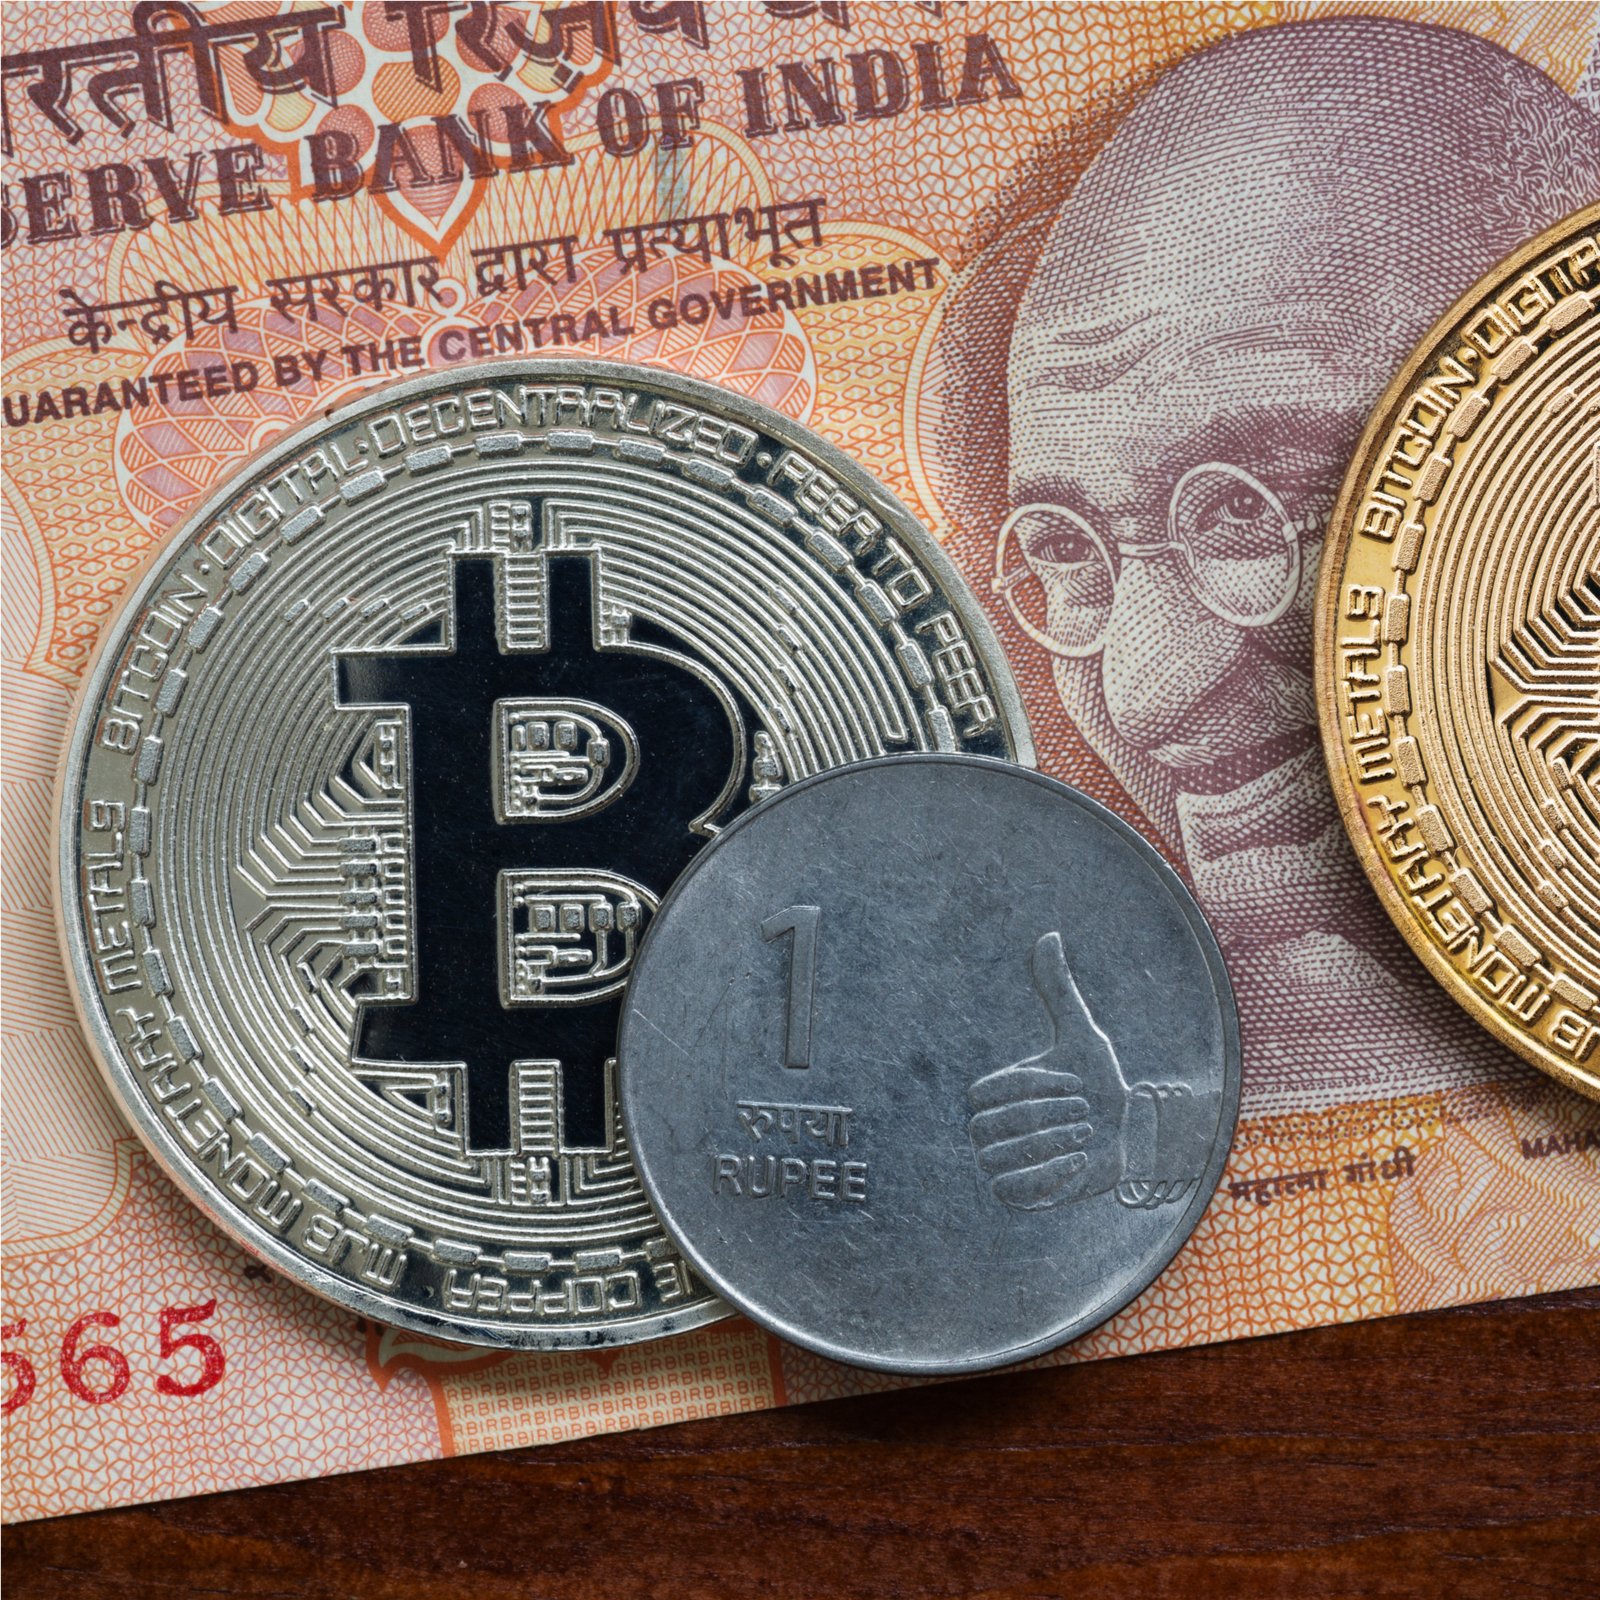 Indian Exchange Takes Central Bank to Court Over Bank Ban